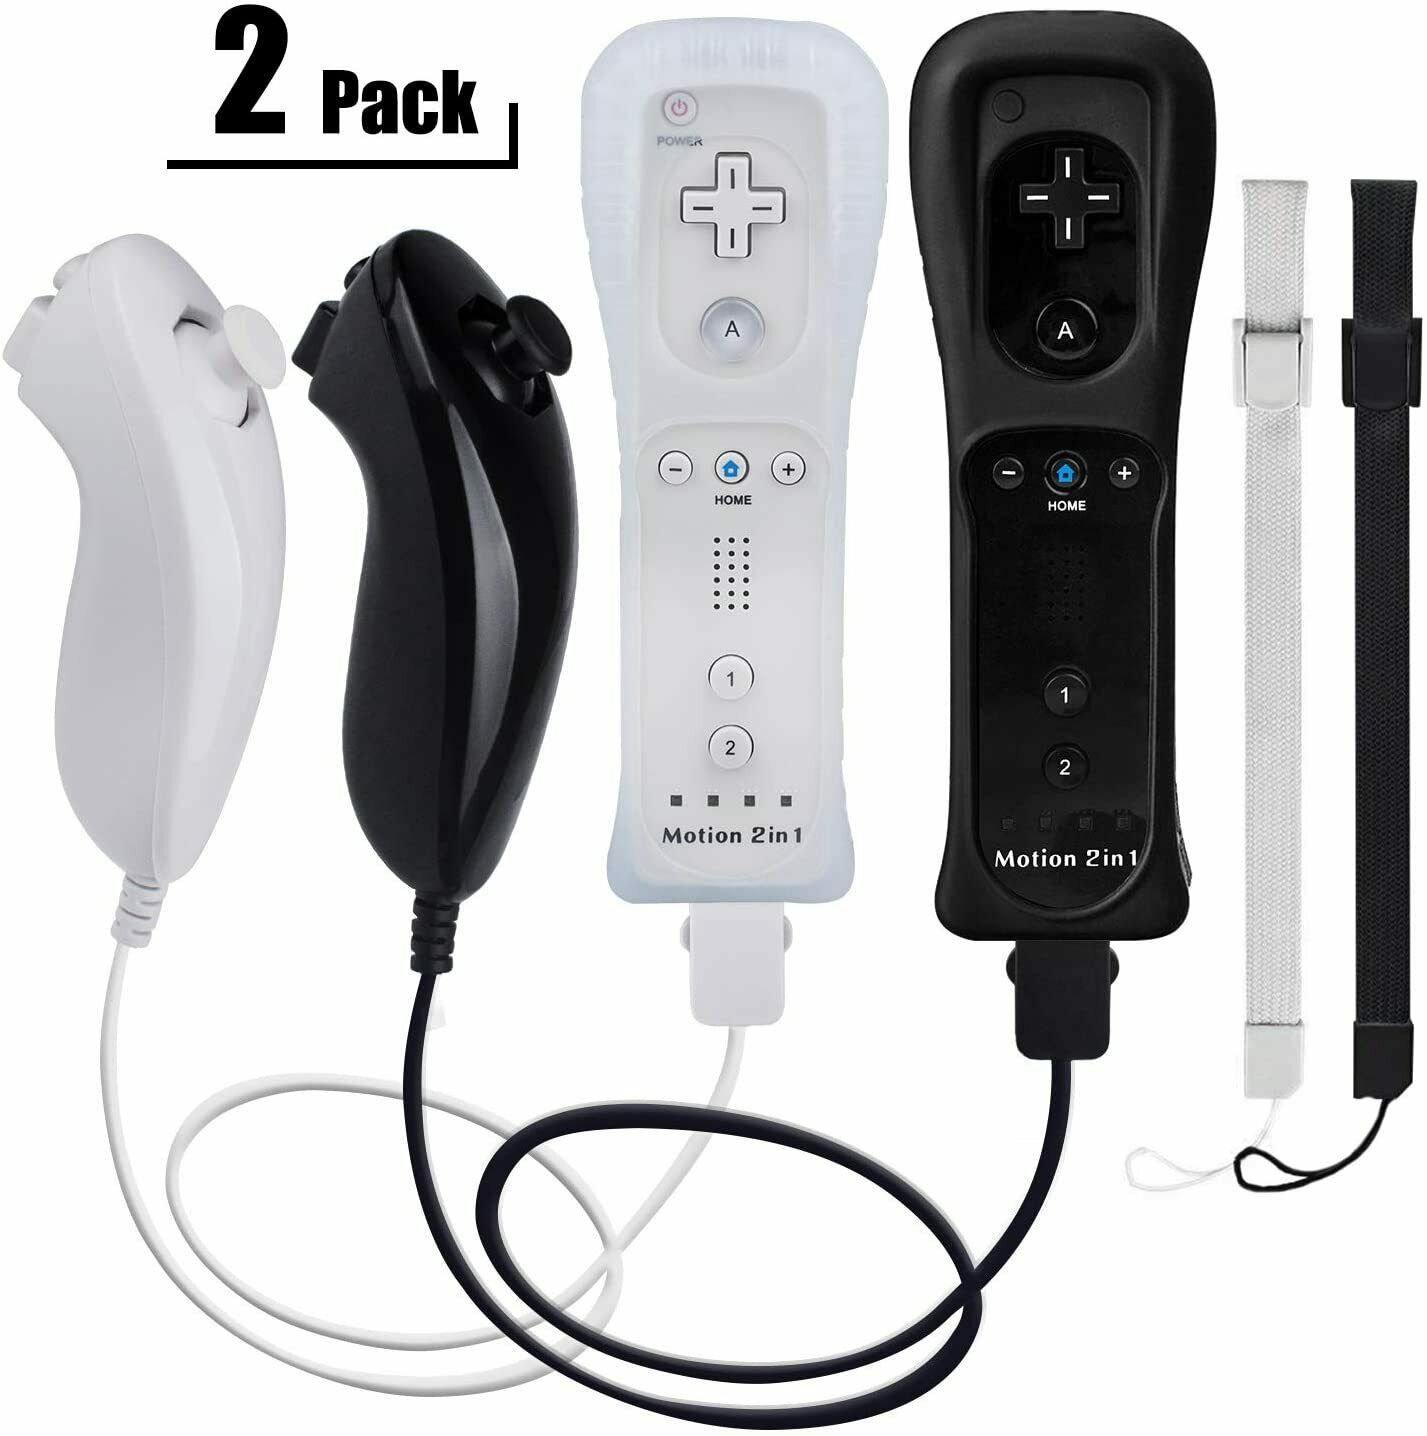 Remote Nunchuck Controller Built In Motion Plus Wireless For Nintendo Wii /wii U